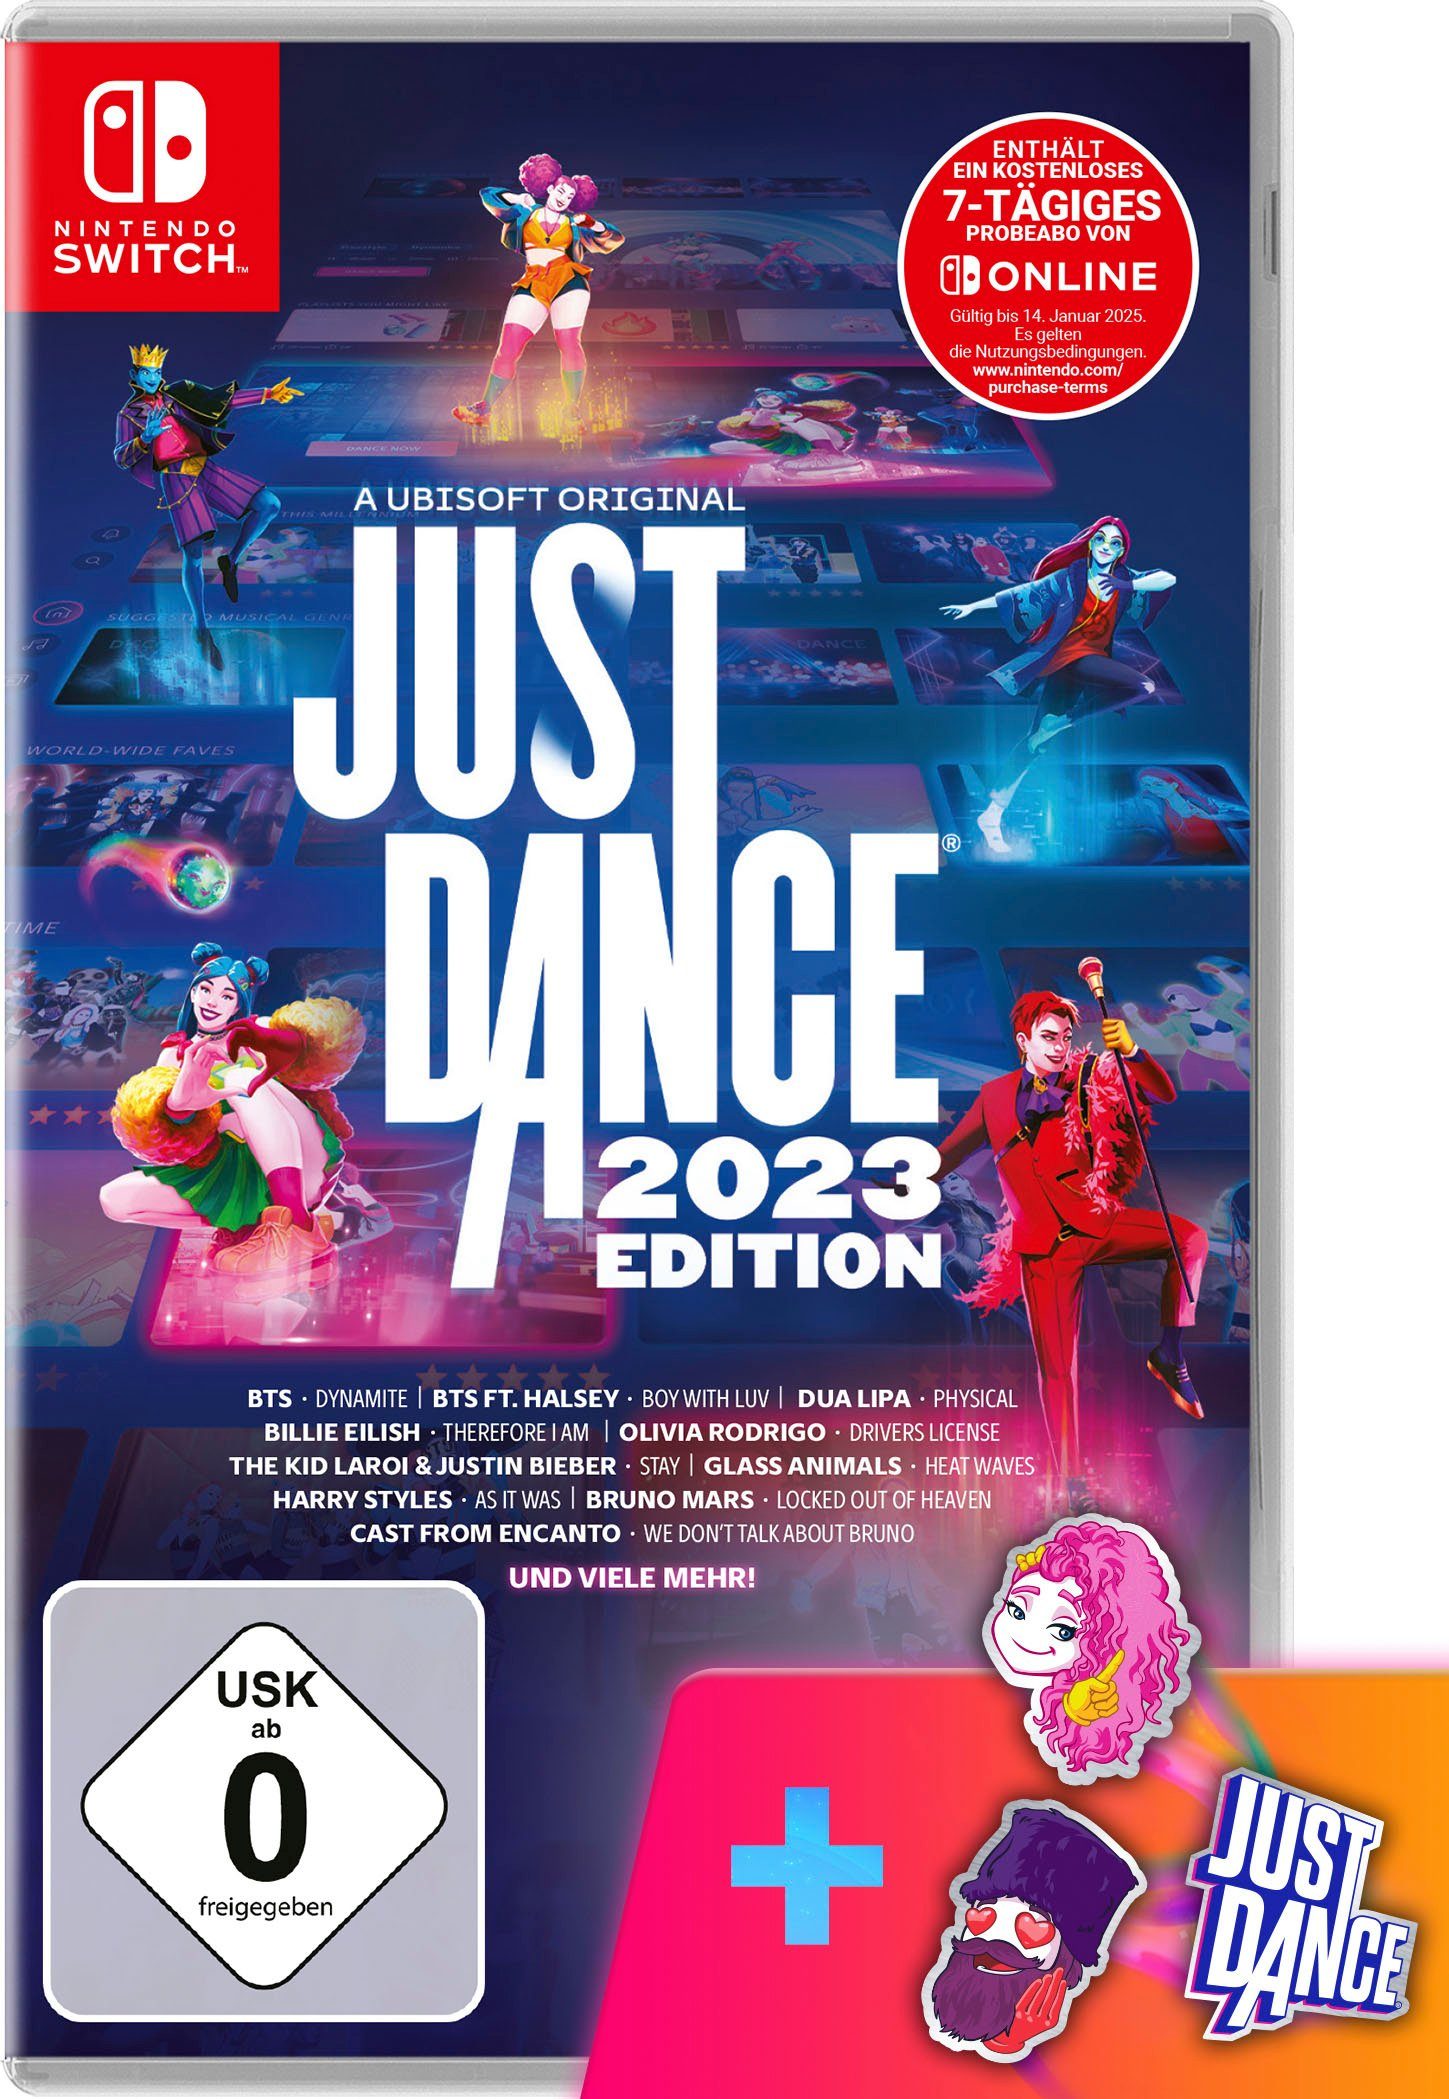 in 2023 Dance Nintendo Switch Just Edition (Code a - box)